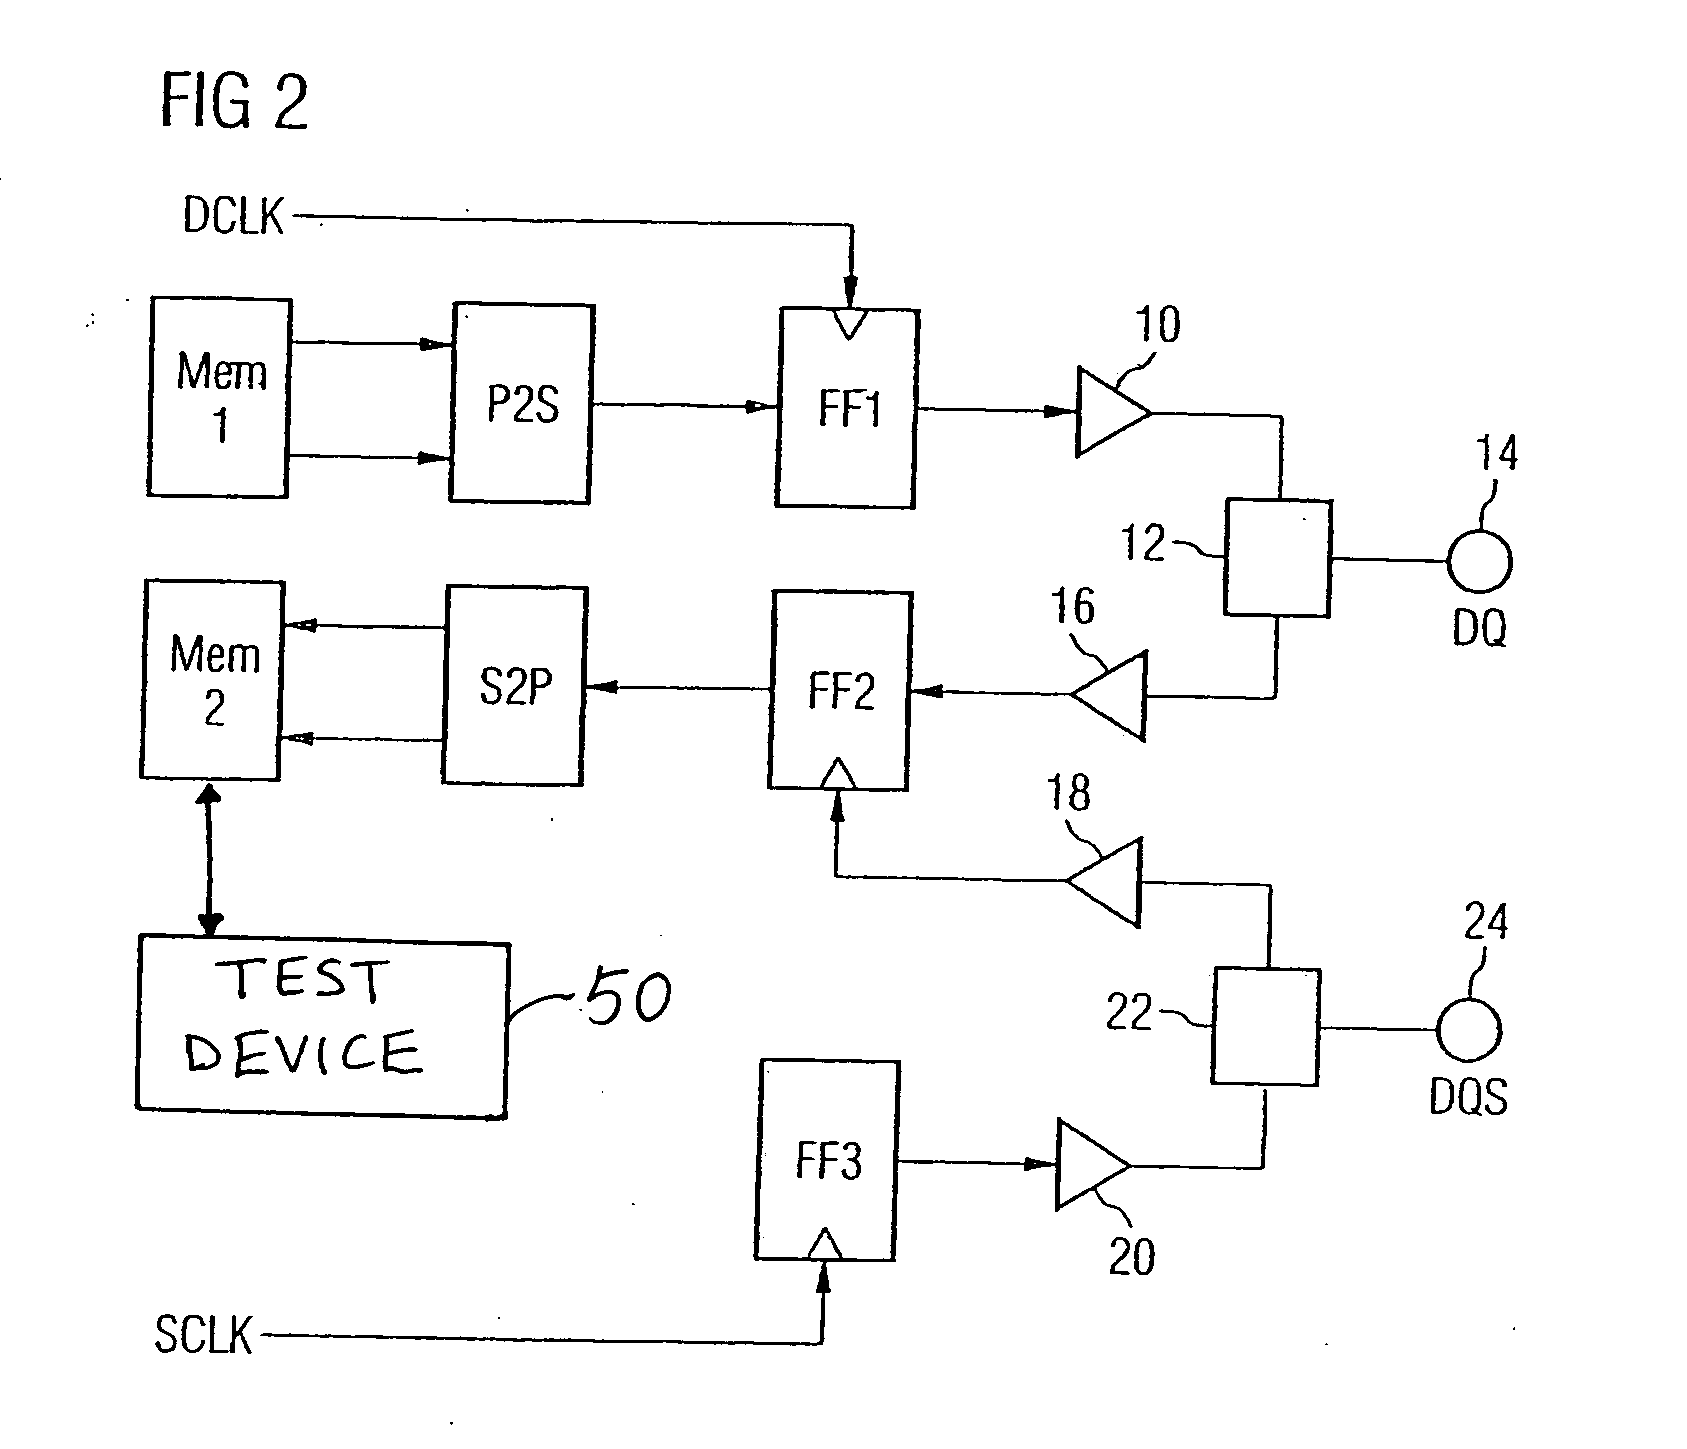 Loop-back method for measuring the interface timing of semiconductor memory devices using the normal mode memory